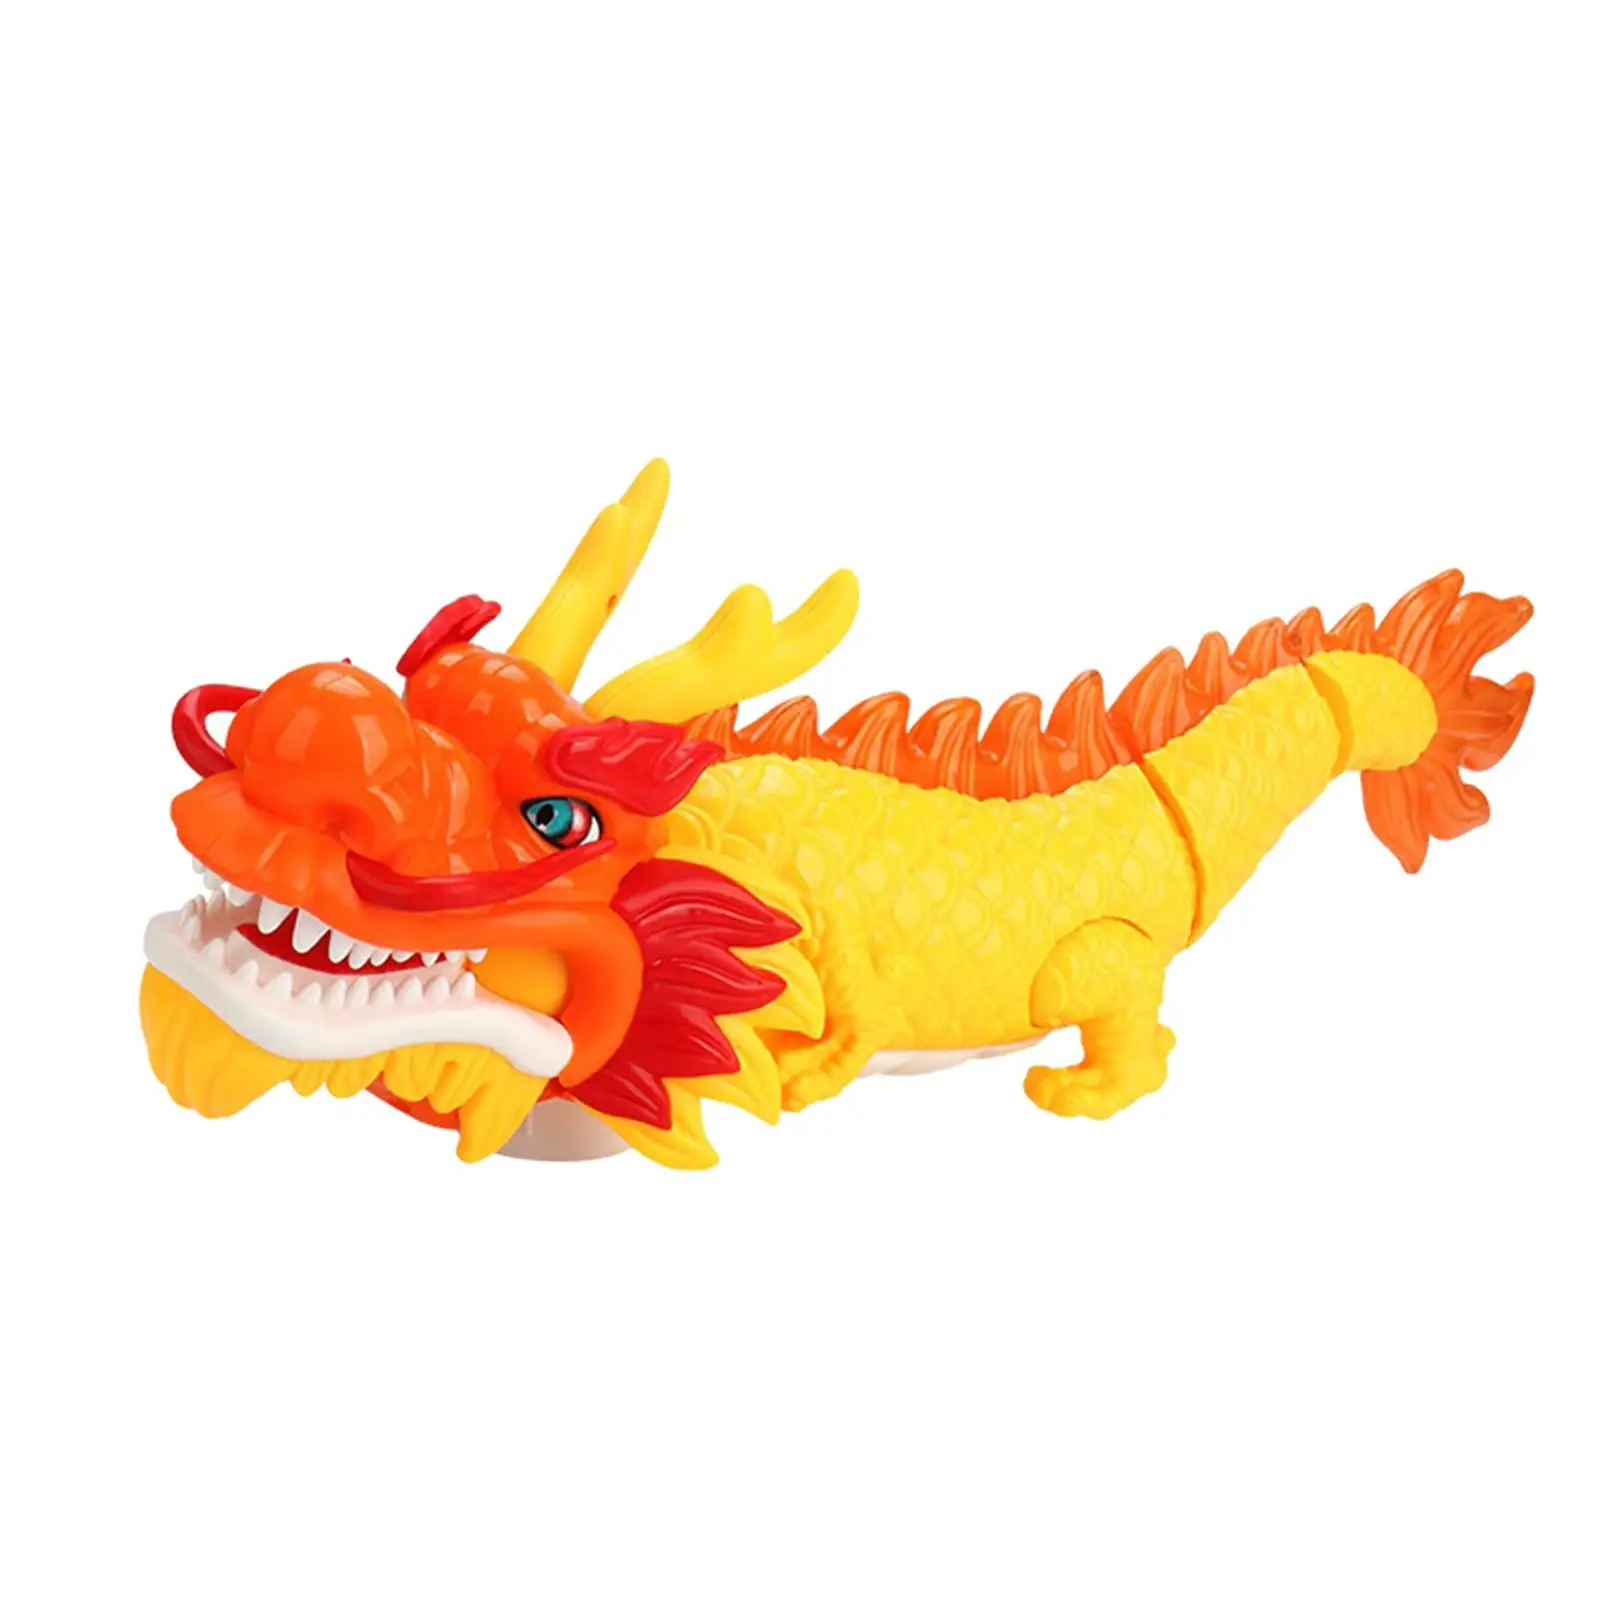 Eletric Dragon Toy Realistic Walking Educational Learning Novelty Infant Toy for Children 4 5 6 7 8 9 Year Olds Boys Kid Adults